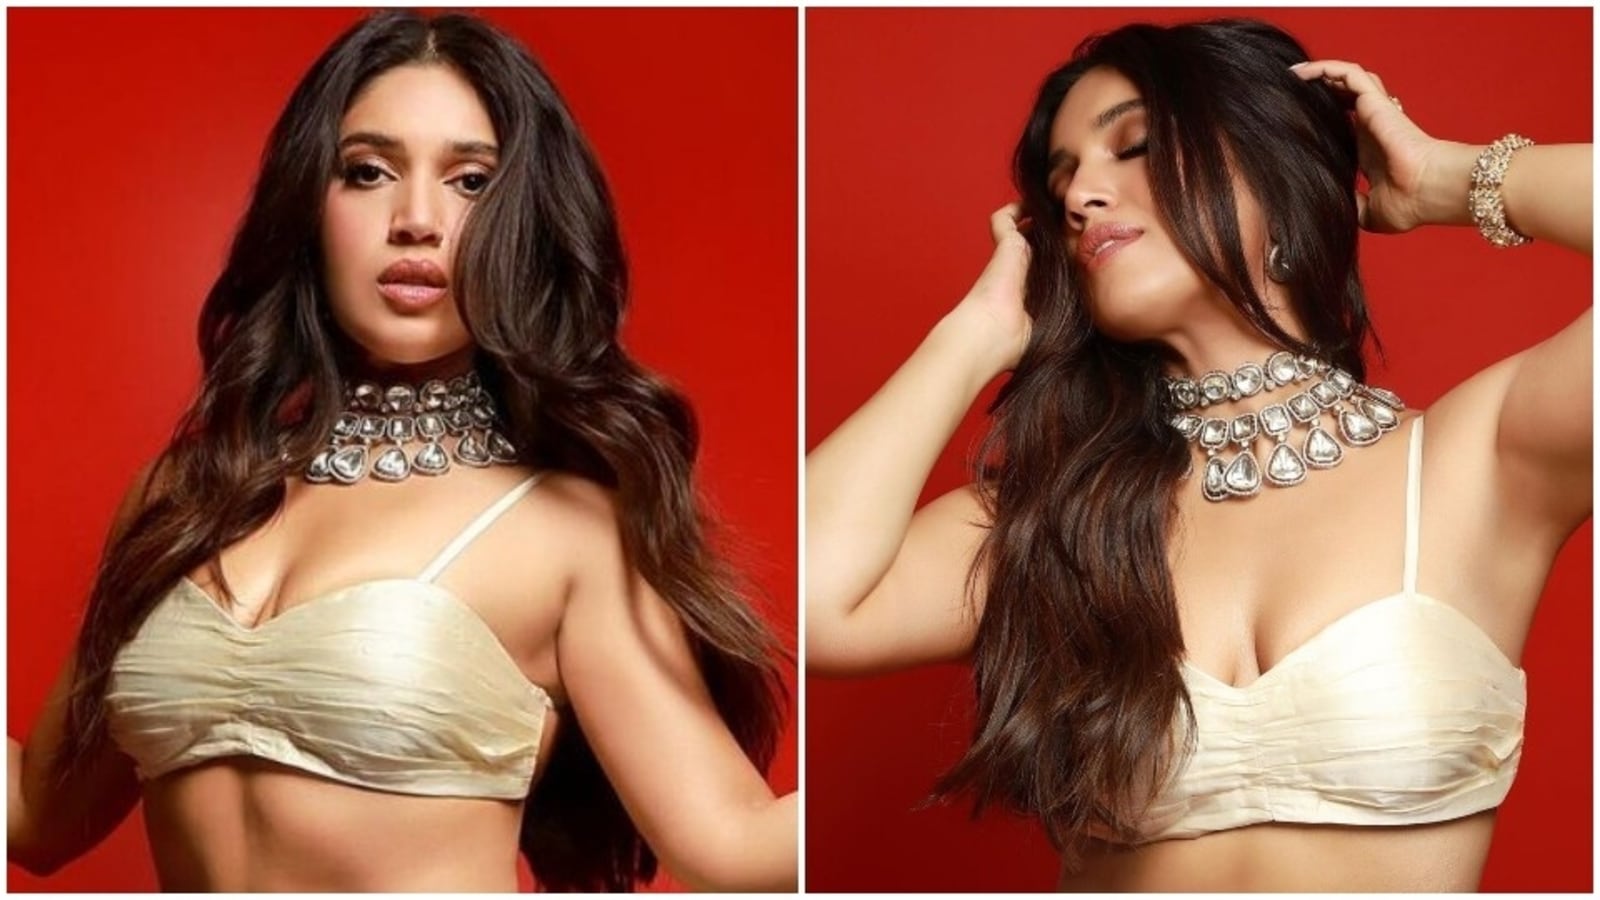 Bhumi Pednekar is a ‘Proper Patola’ in bralette and embroidered lehenga, Internet says ‘Bringing the heat’: All pics